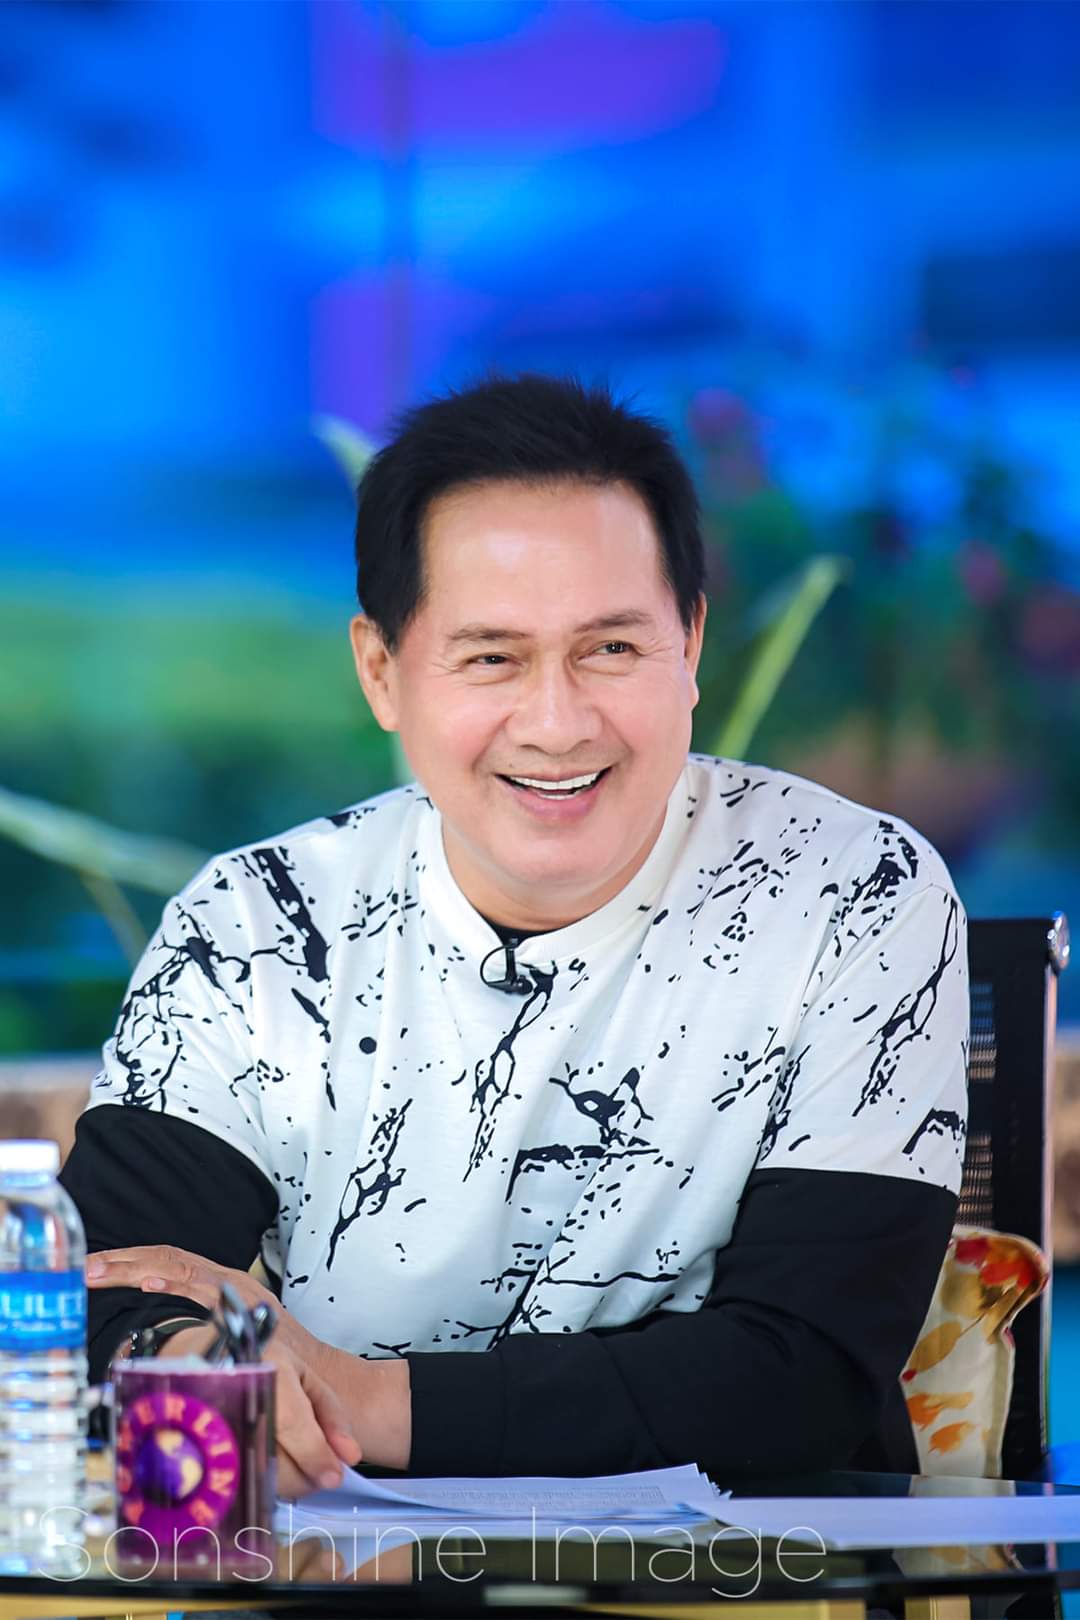 Pastor Quiboloy indicted on sex trafficking charges in the US- Reports